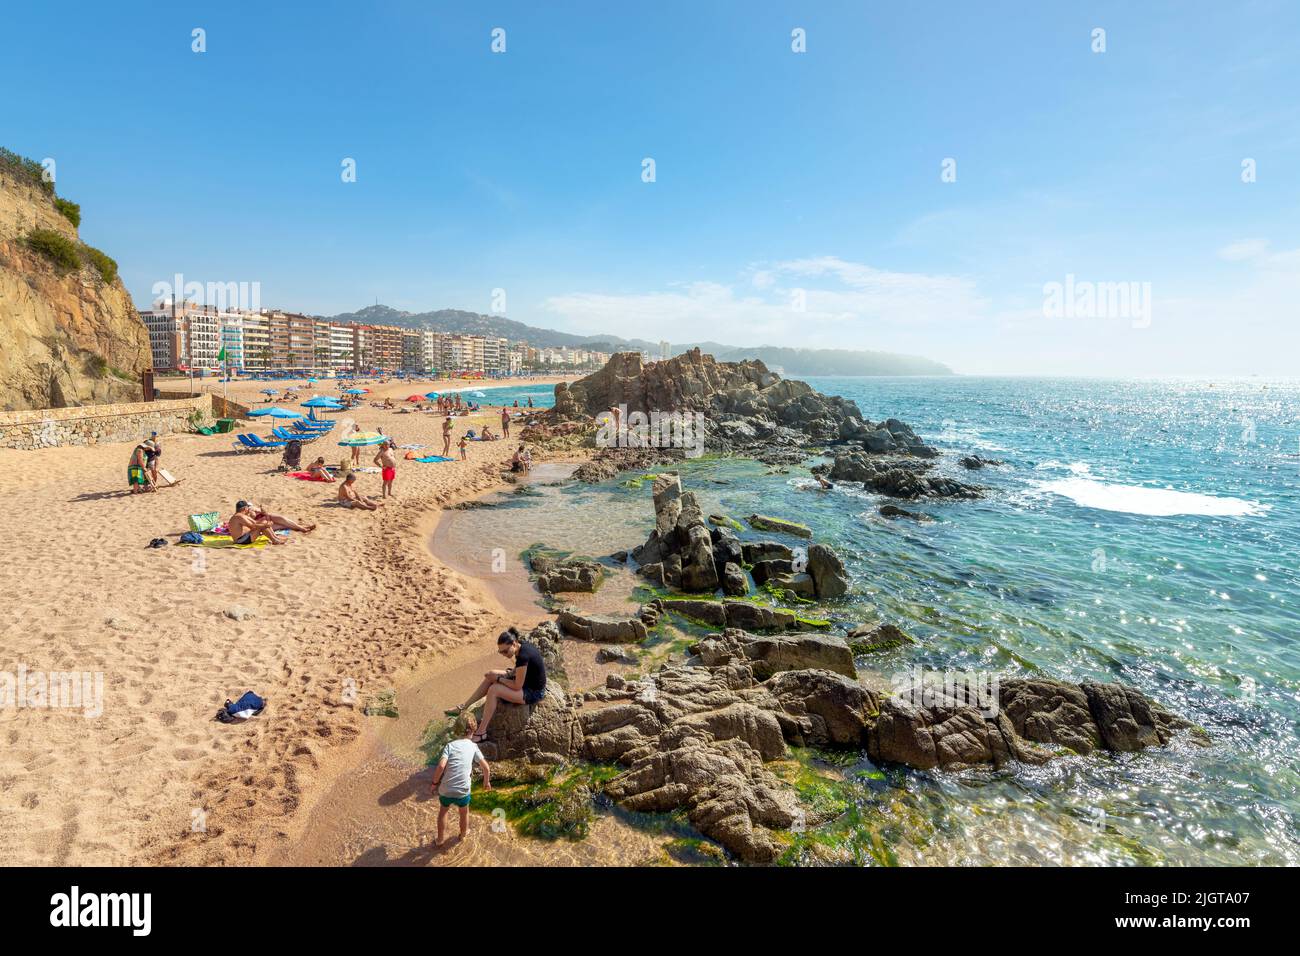 Spanish families enjoy a summer day at the sandy beach of Lloret de Mar on the Costa Brava coast of Southern Spain. Stock Photo